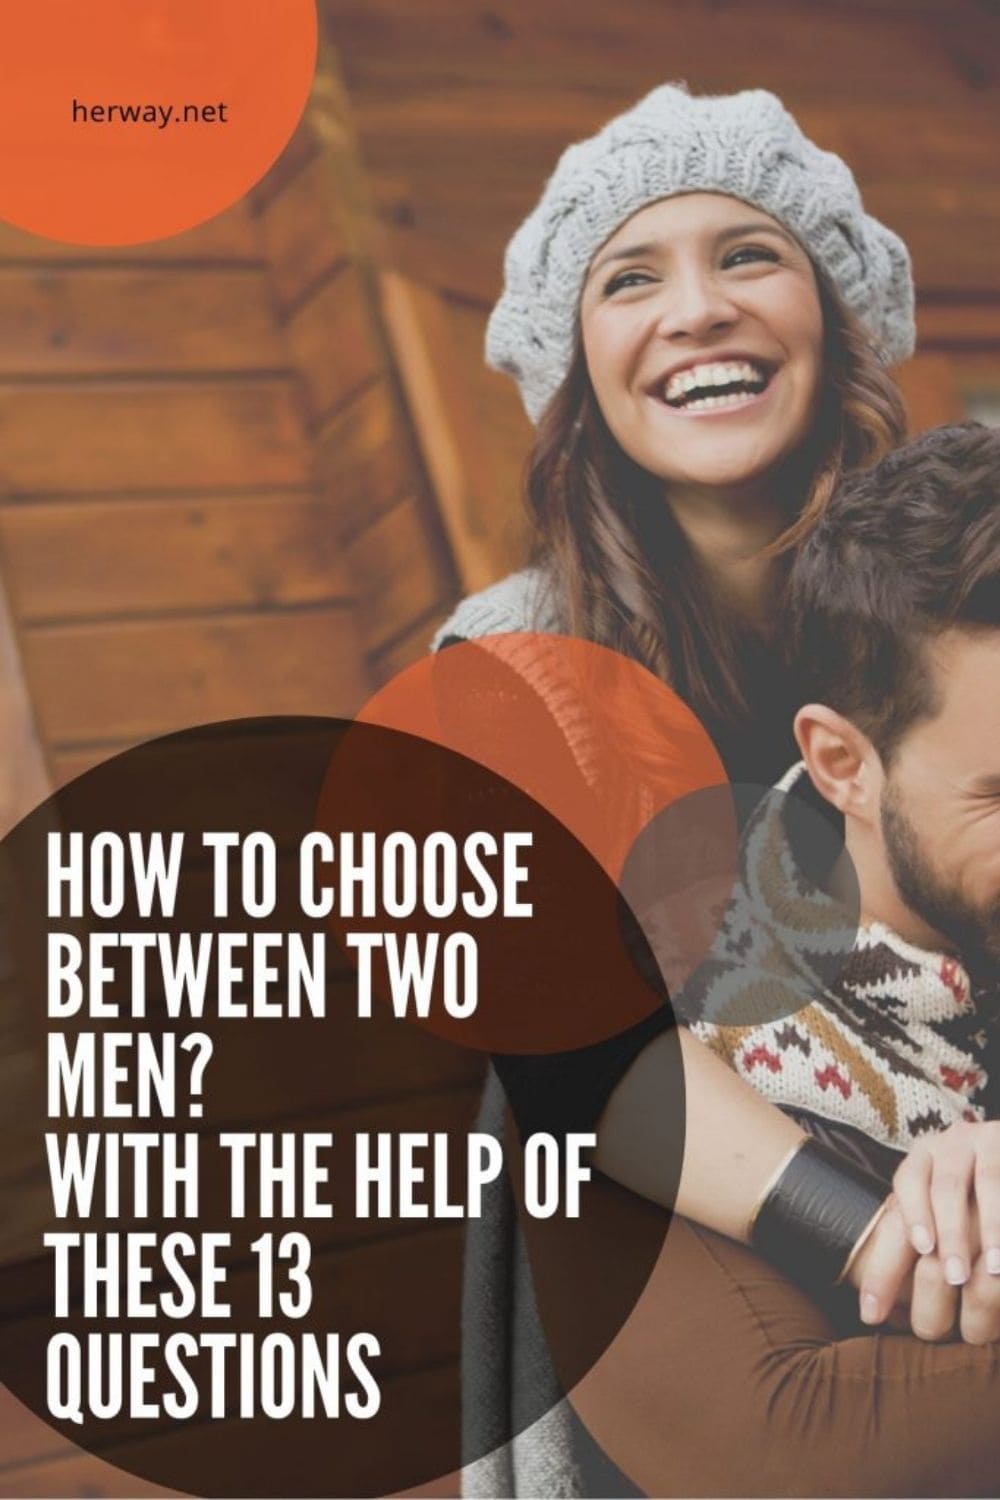 How To Choose Between Two Men? With The Help Of These 13 Questions